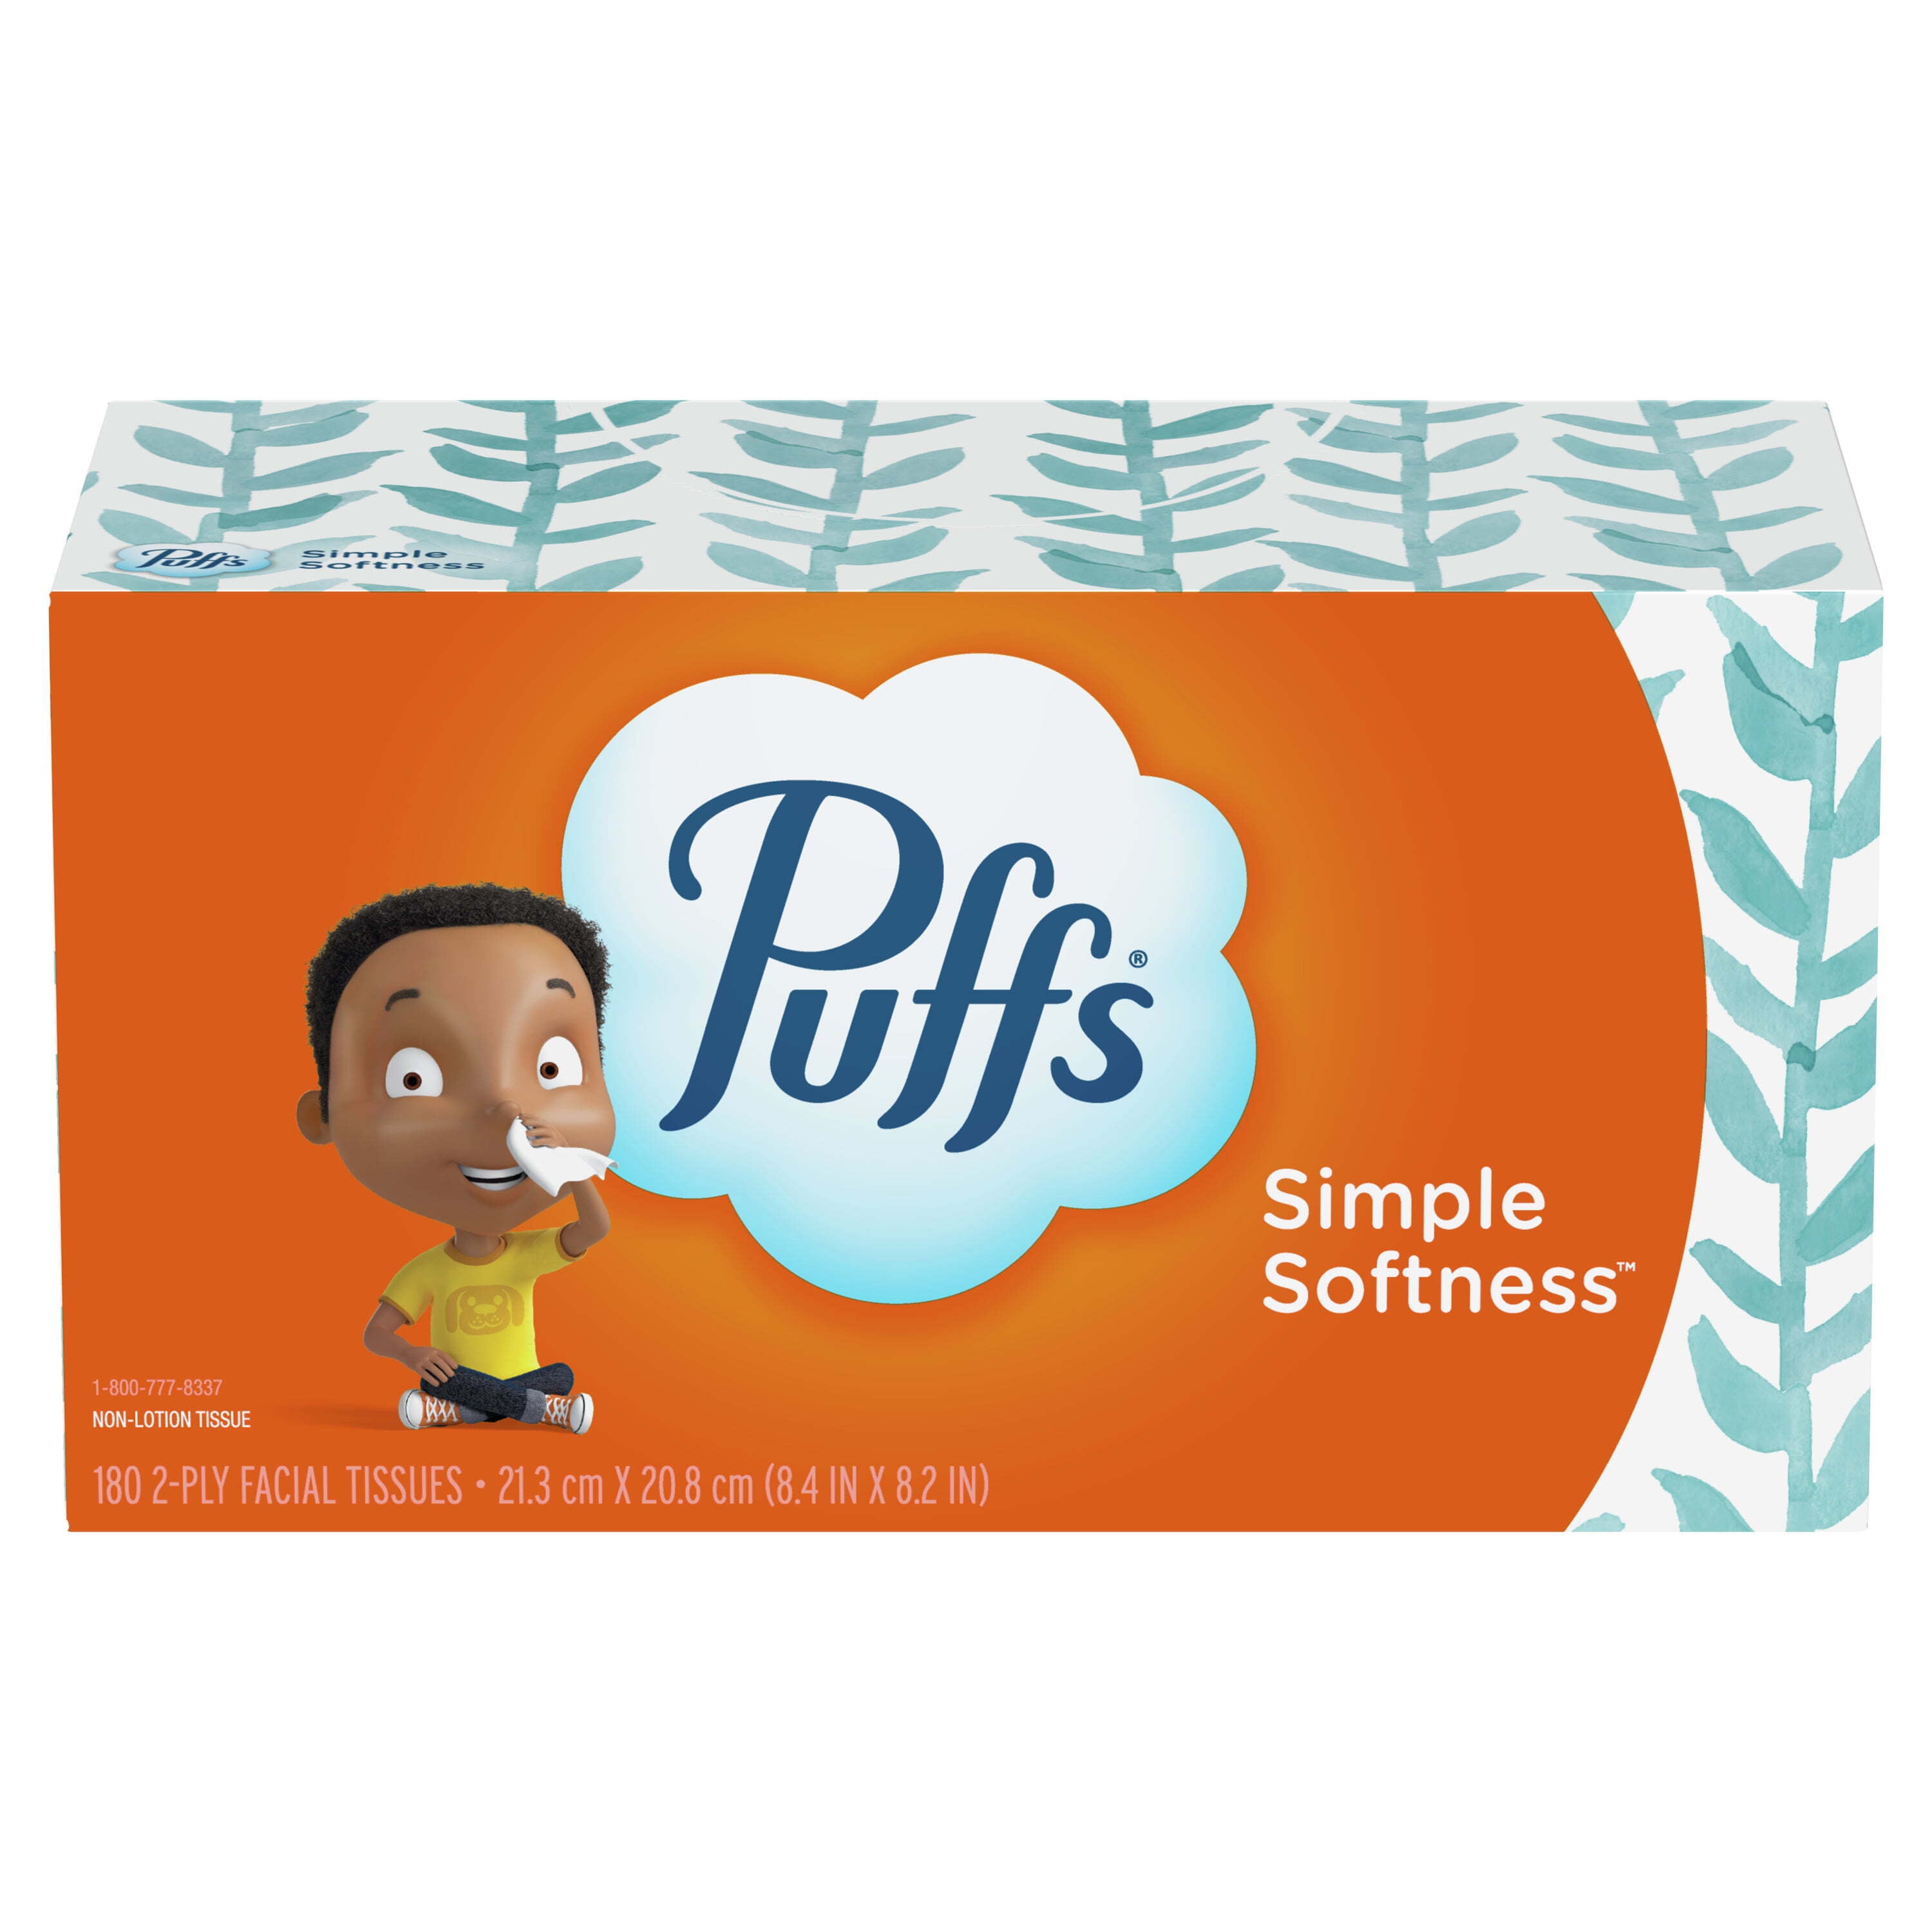 Puffs Simple Softness Facial Tissue, Family Size Box, 180 Tissues Per Box, 1 Count